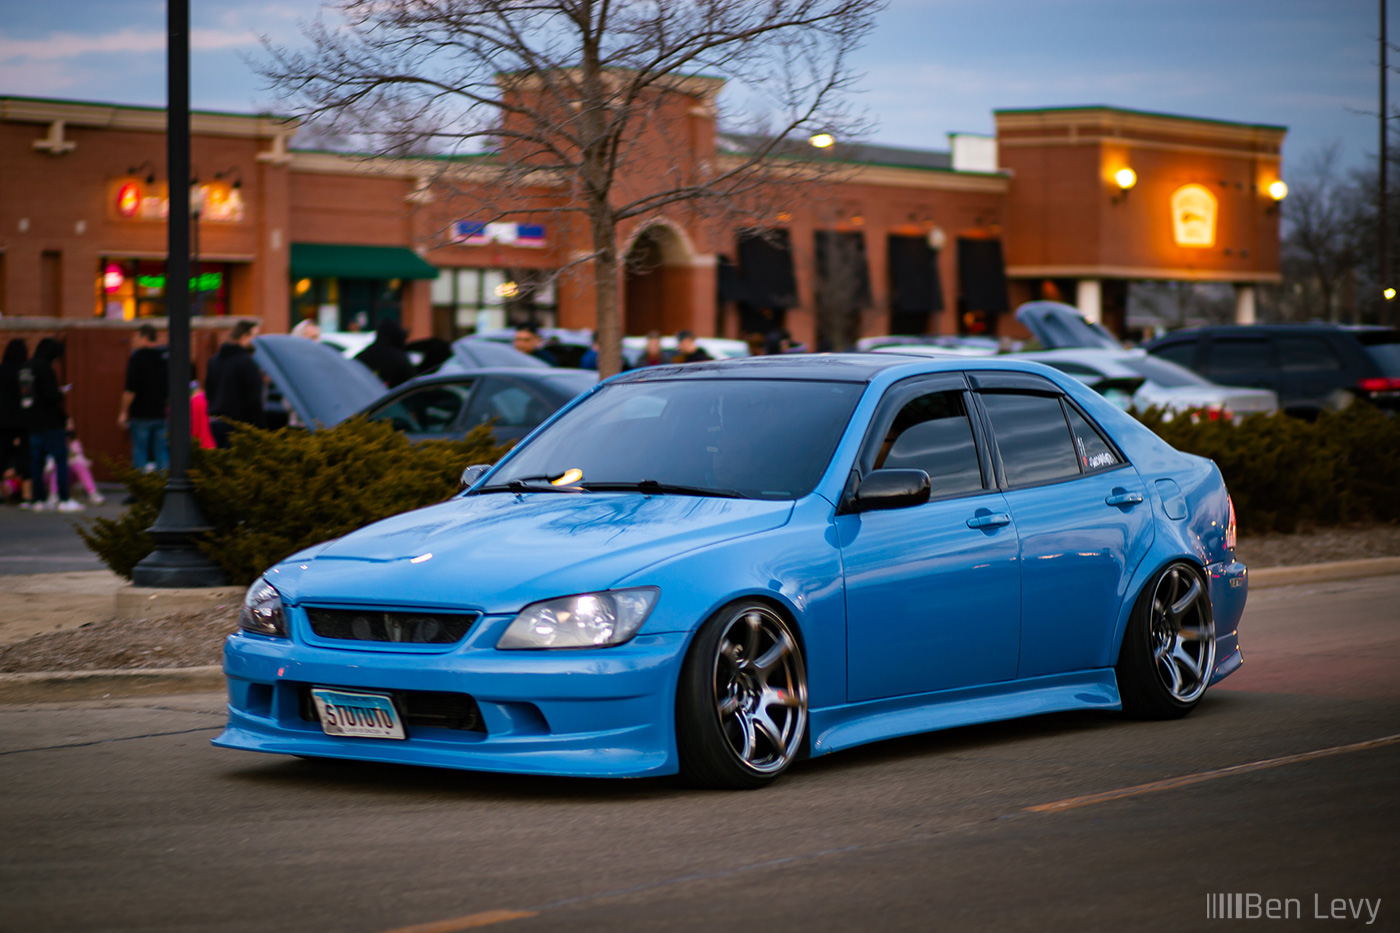 Baby Blue Lexus IS300 at Cars and Culture Car Meet